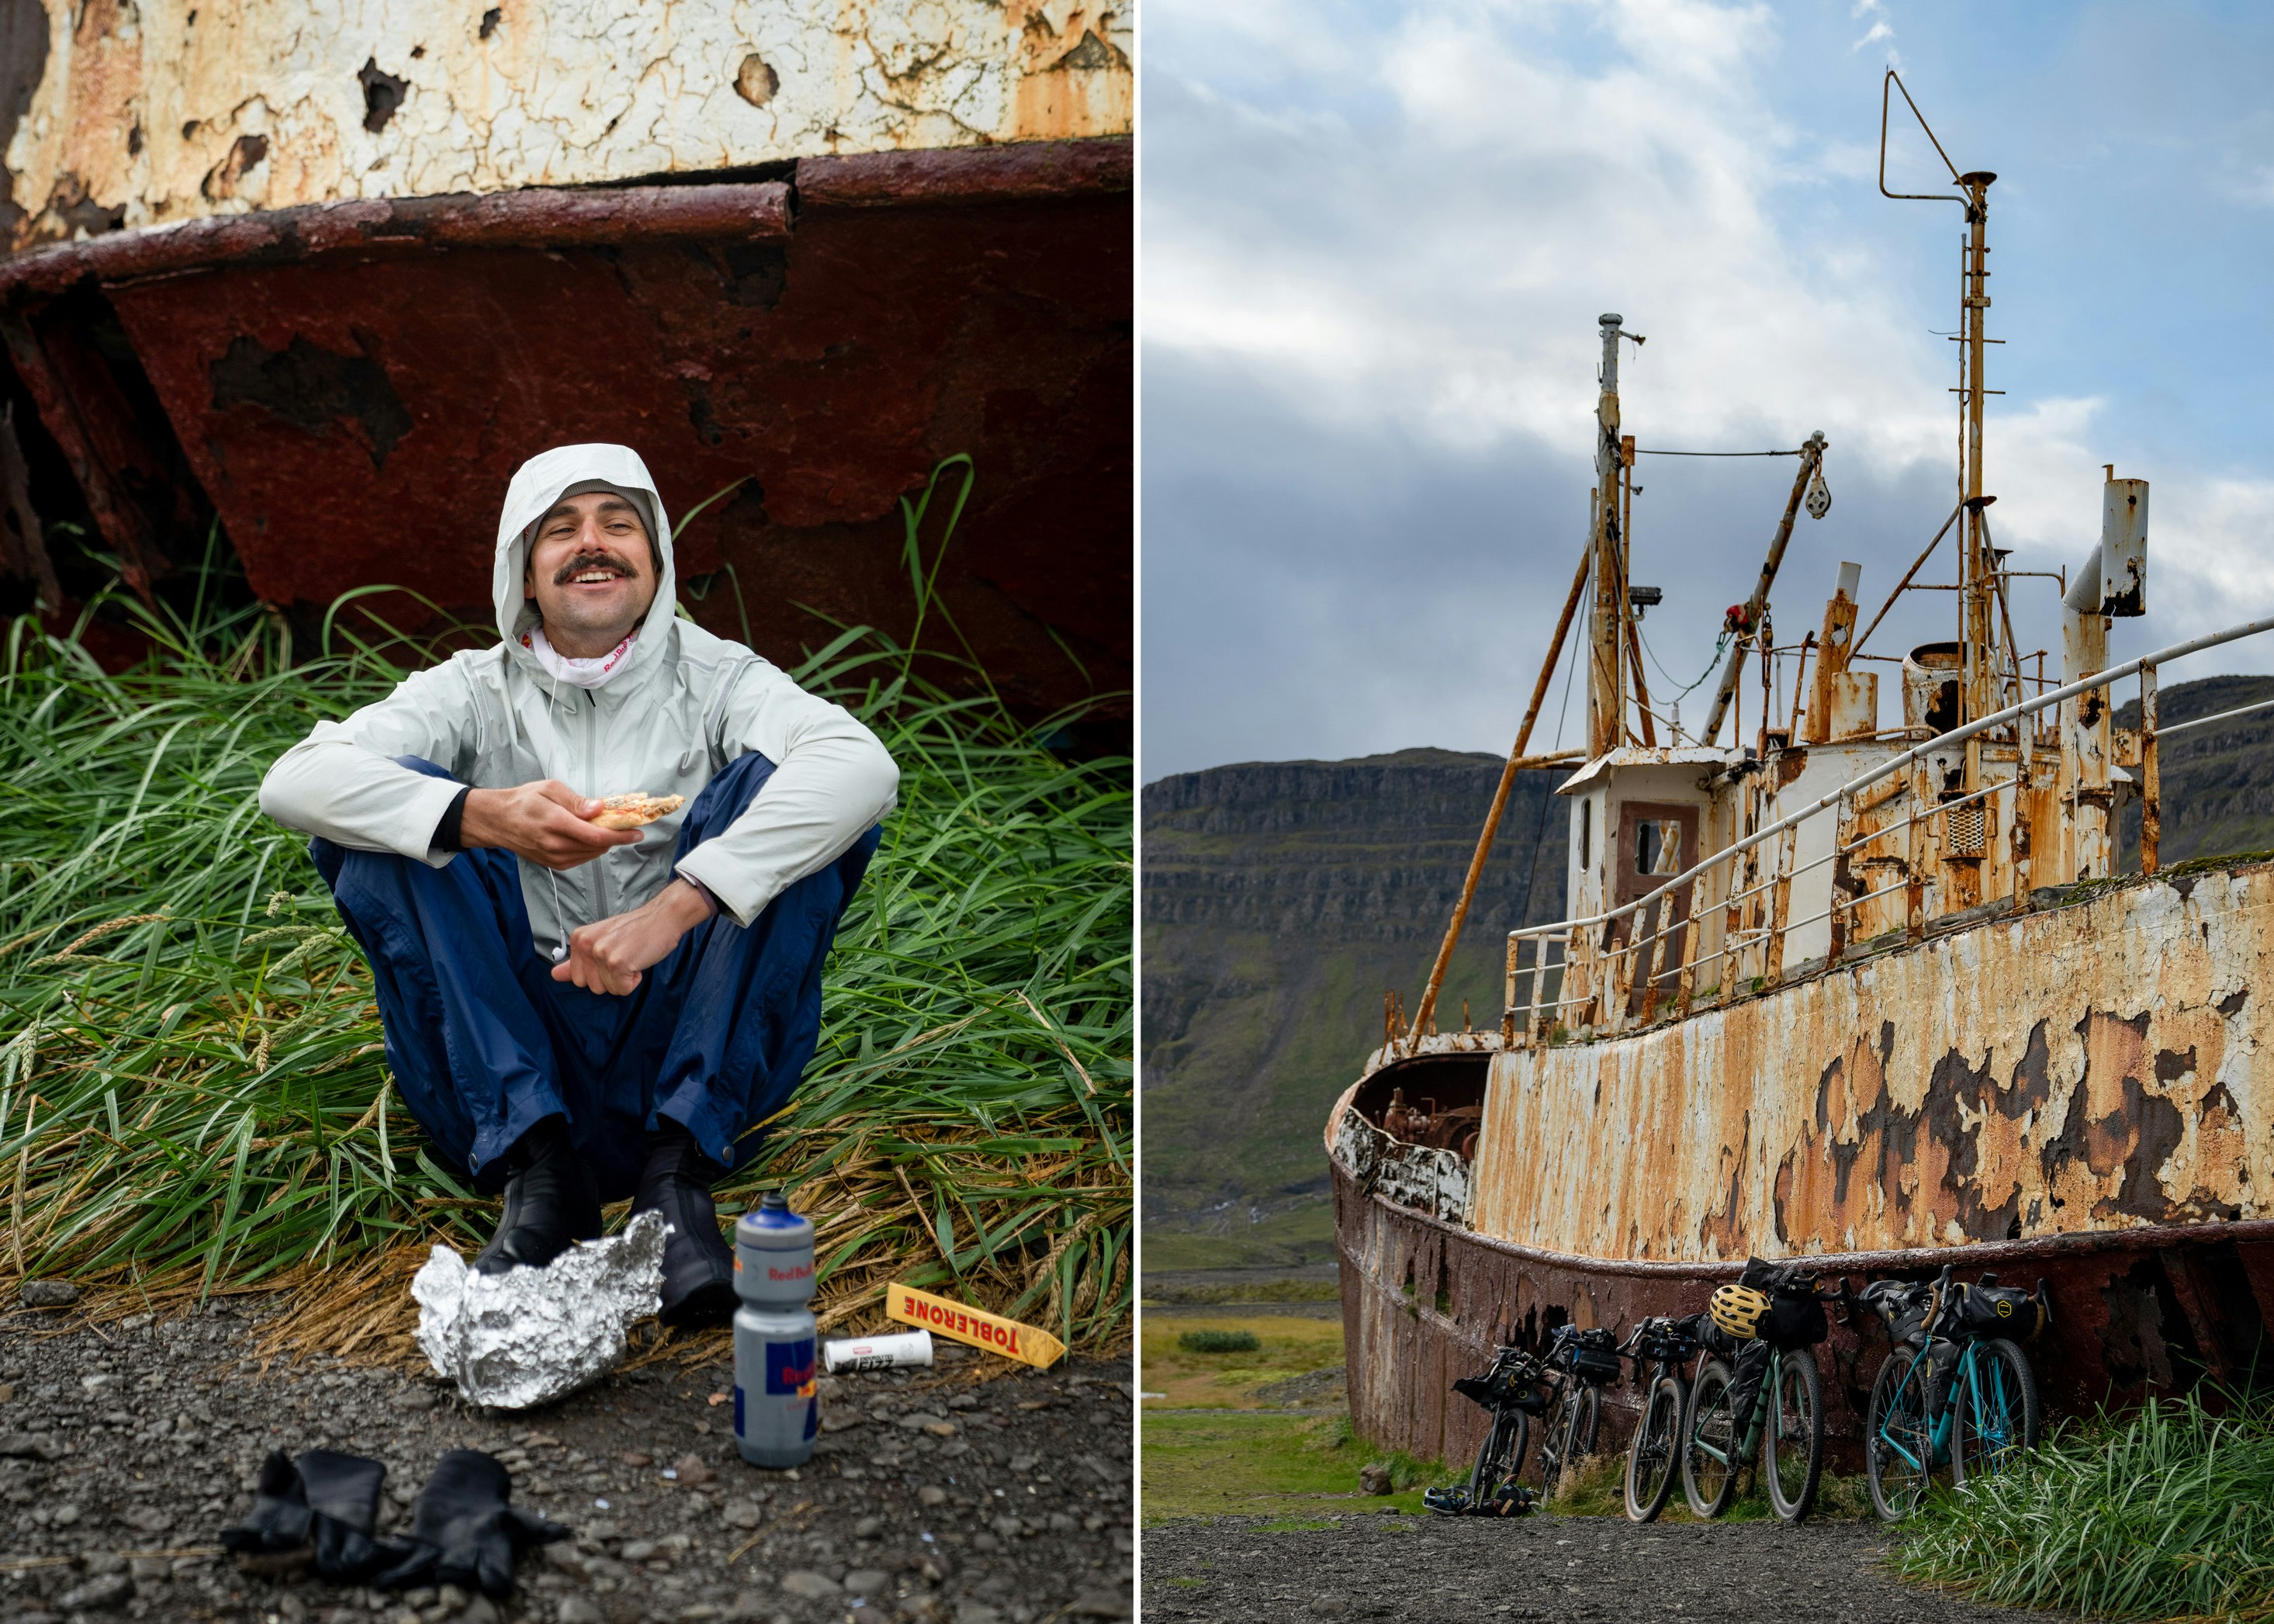 Payson McElveen laughs while resting near a rusty, beached ship.